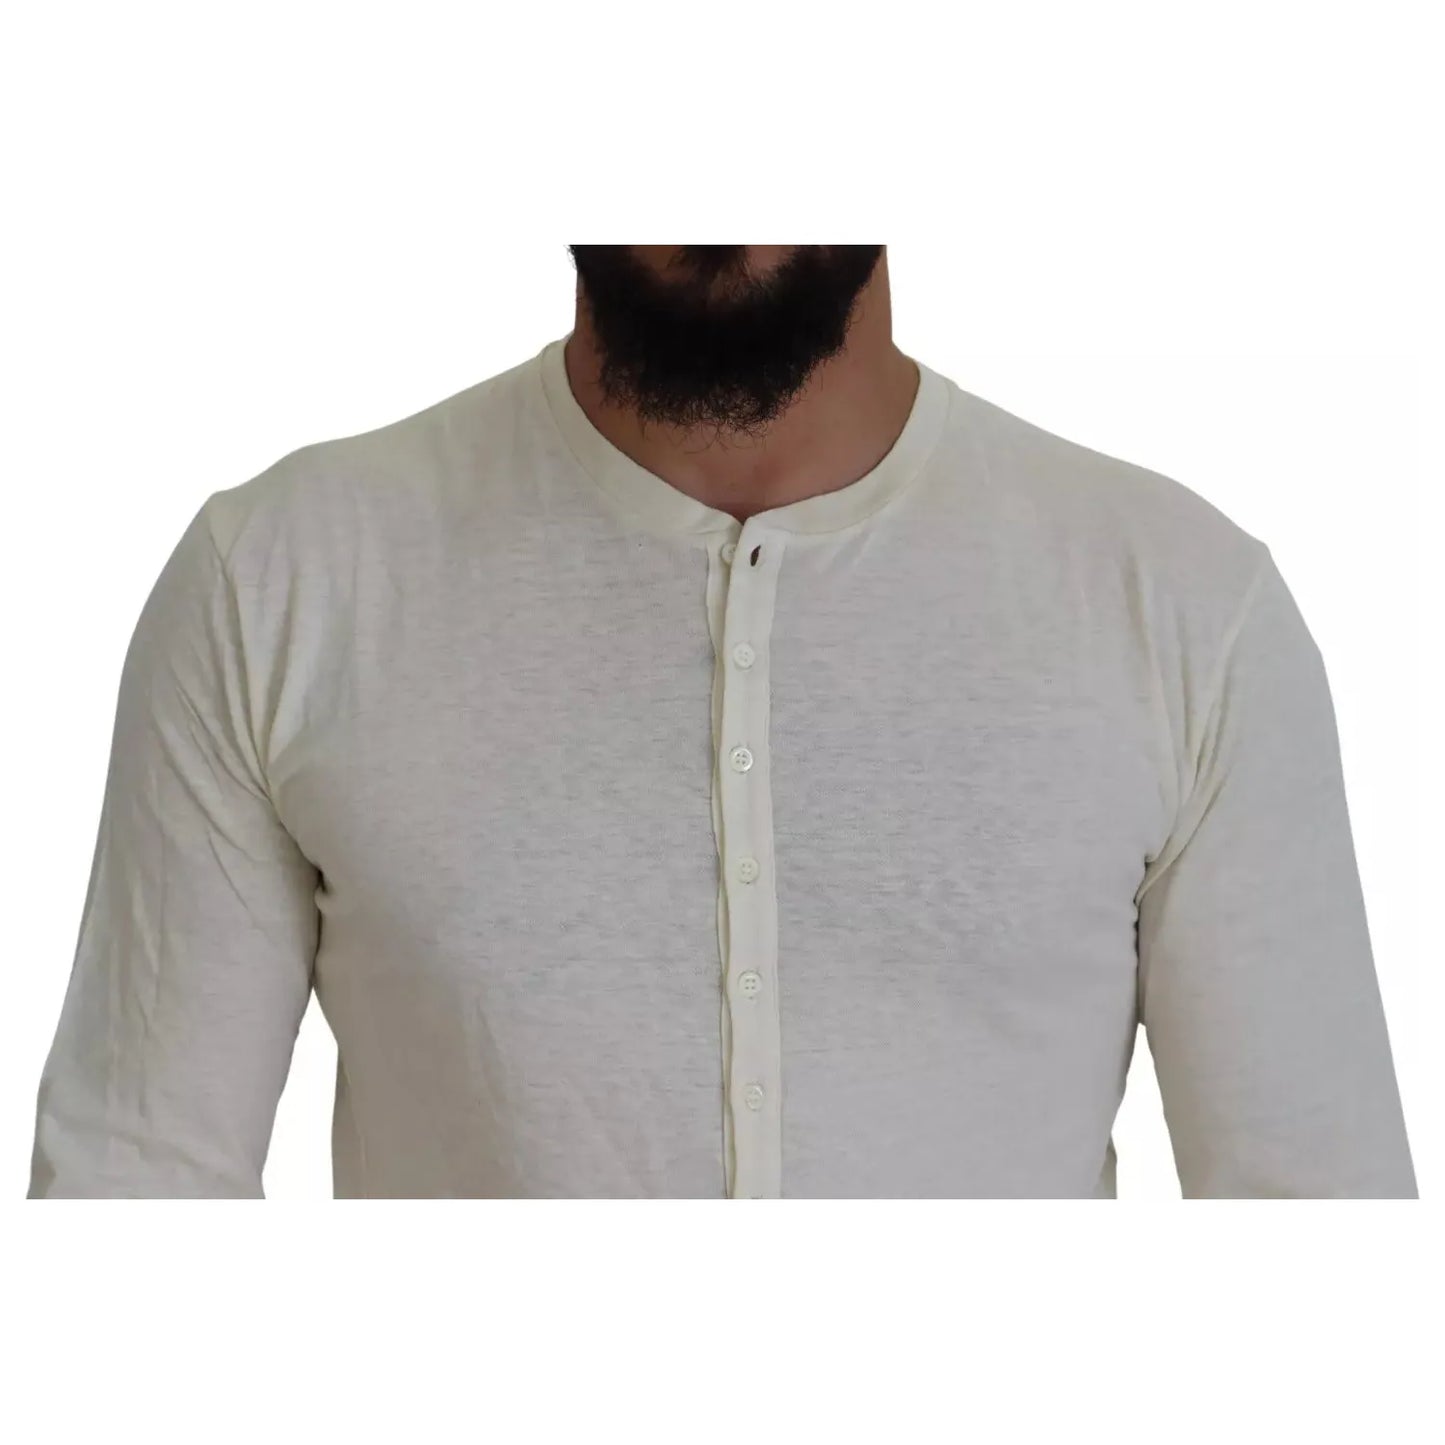 Dsquared² Beige Cotton Linen Long Sleeves Pullover Sweater beige-cotton-linen-long-sleeves-pullover-sweater